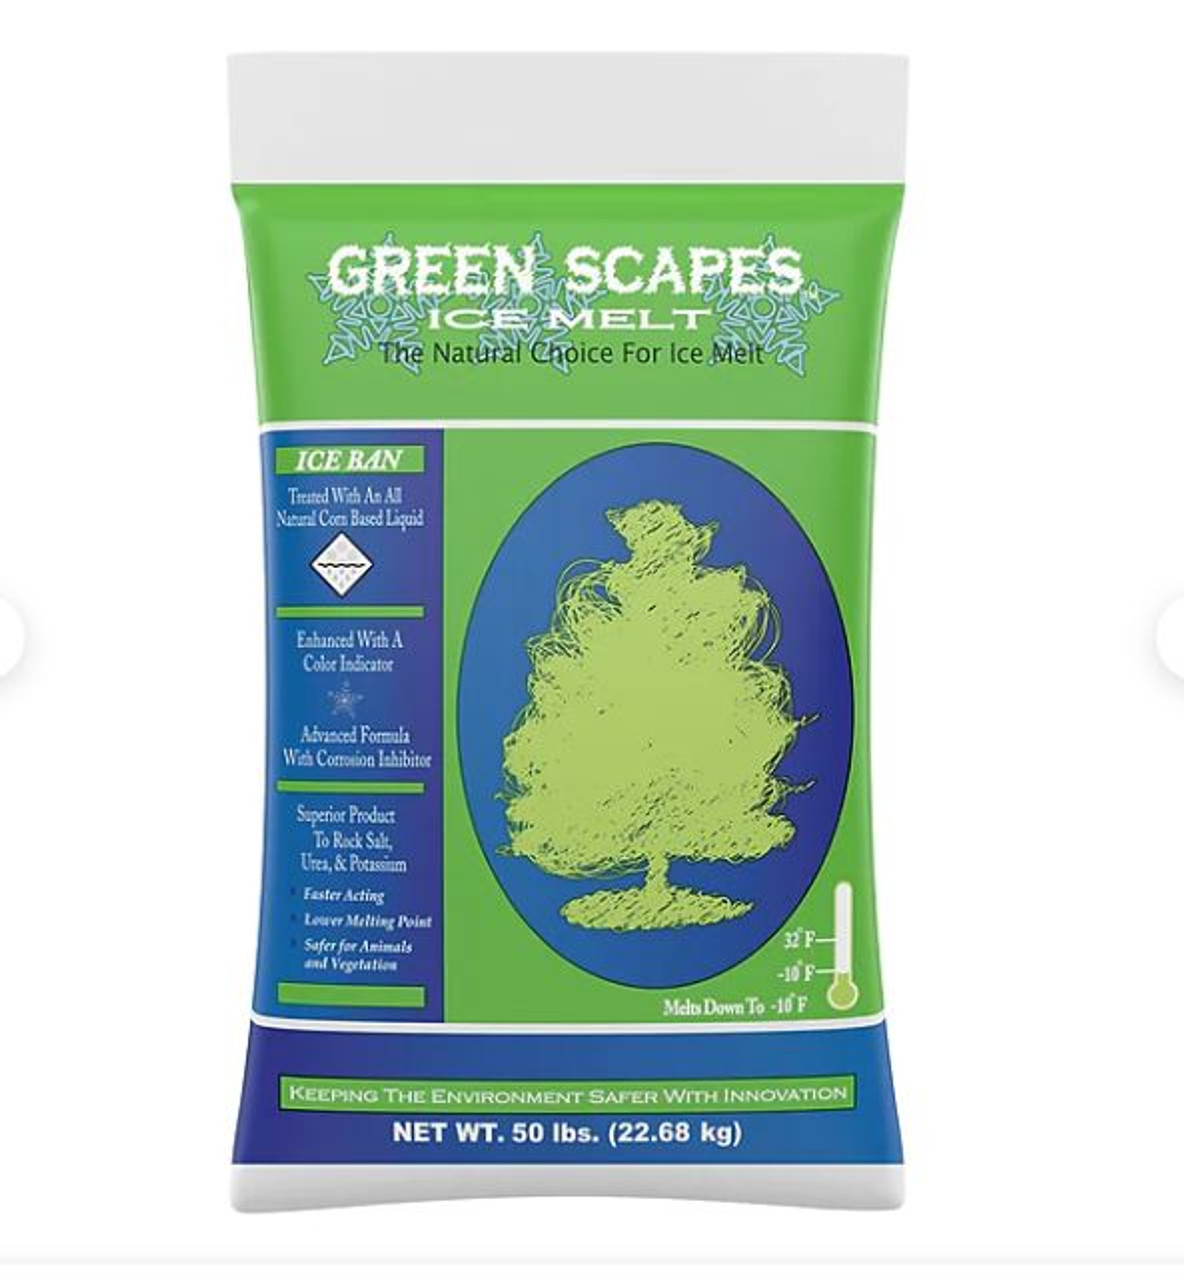 Scotwood Industries Greenscapes 50 Lbs. Ice Melt Bag